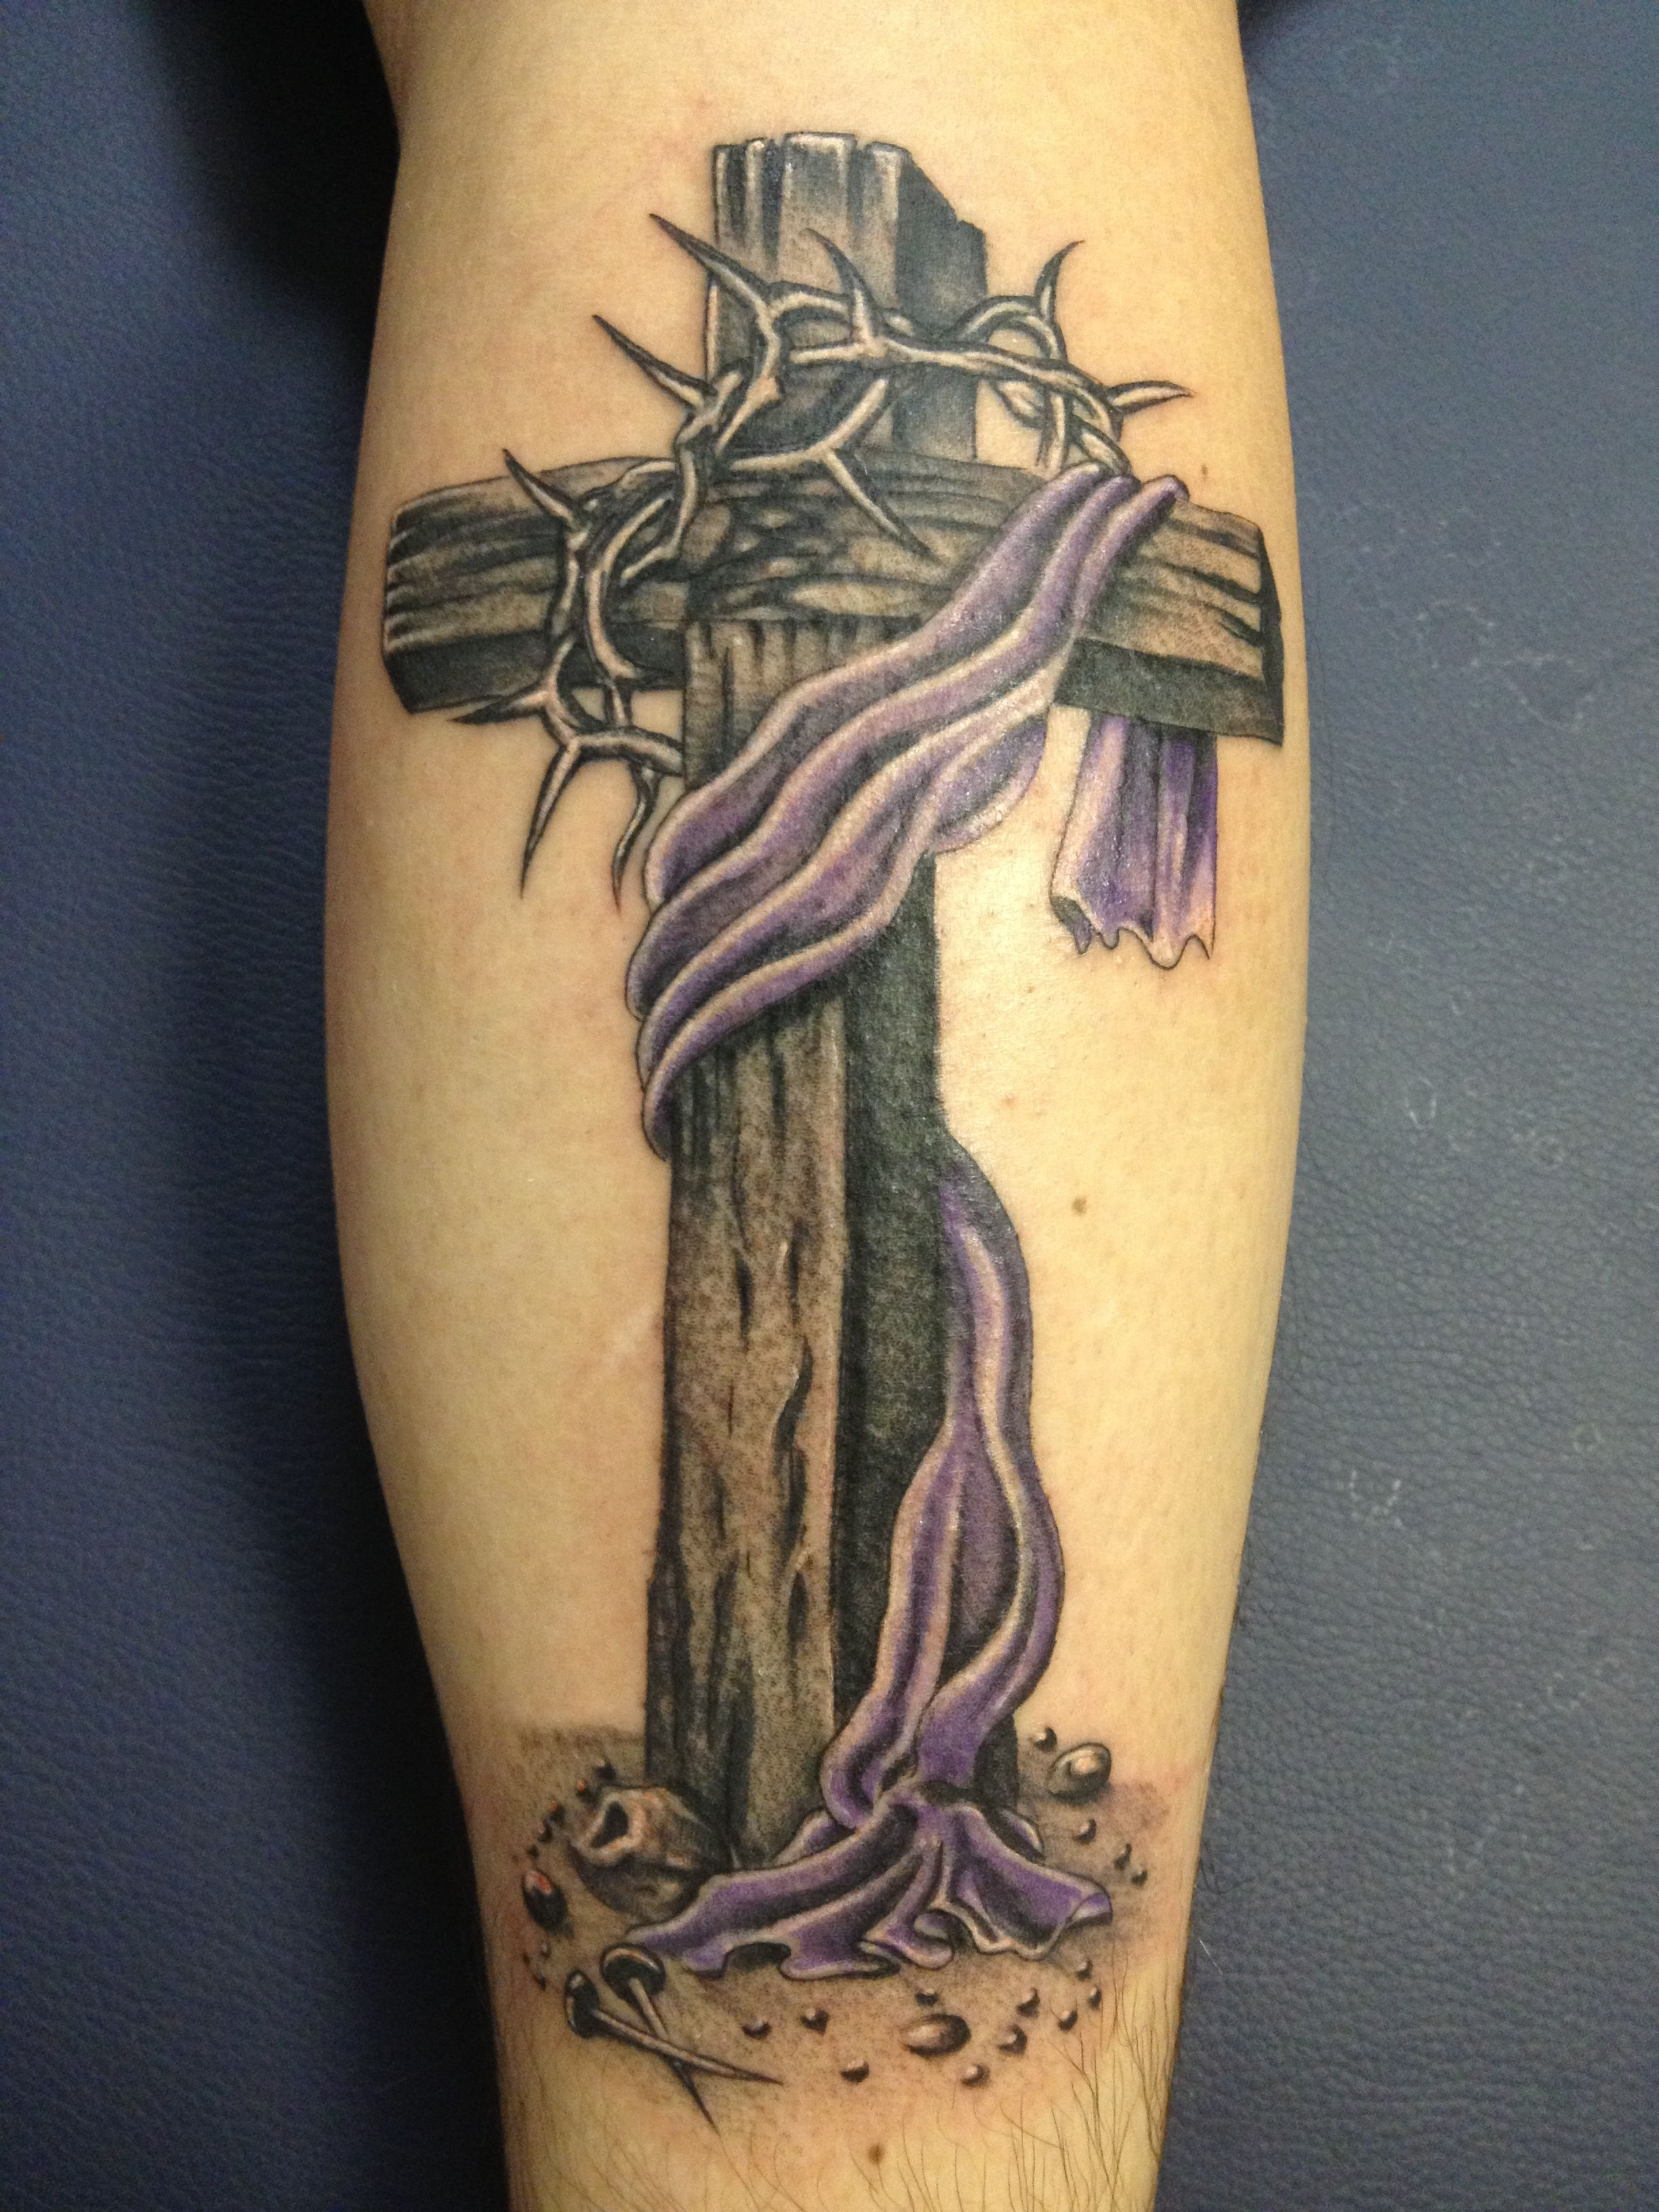 Ephesian Cross With Crown Of Thorns Tattoos Tattoos Body Art throughout dimensions 2448 X 3264